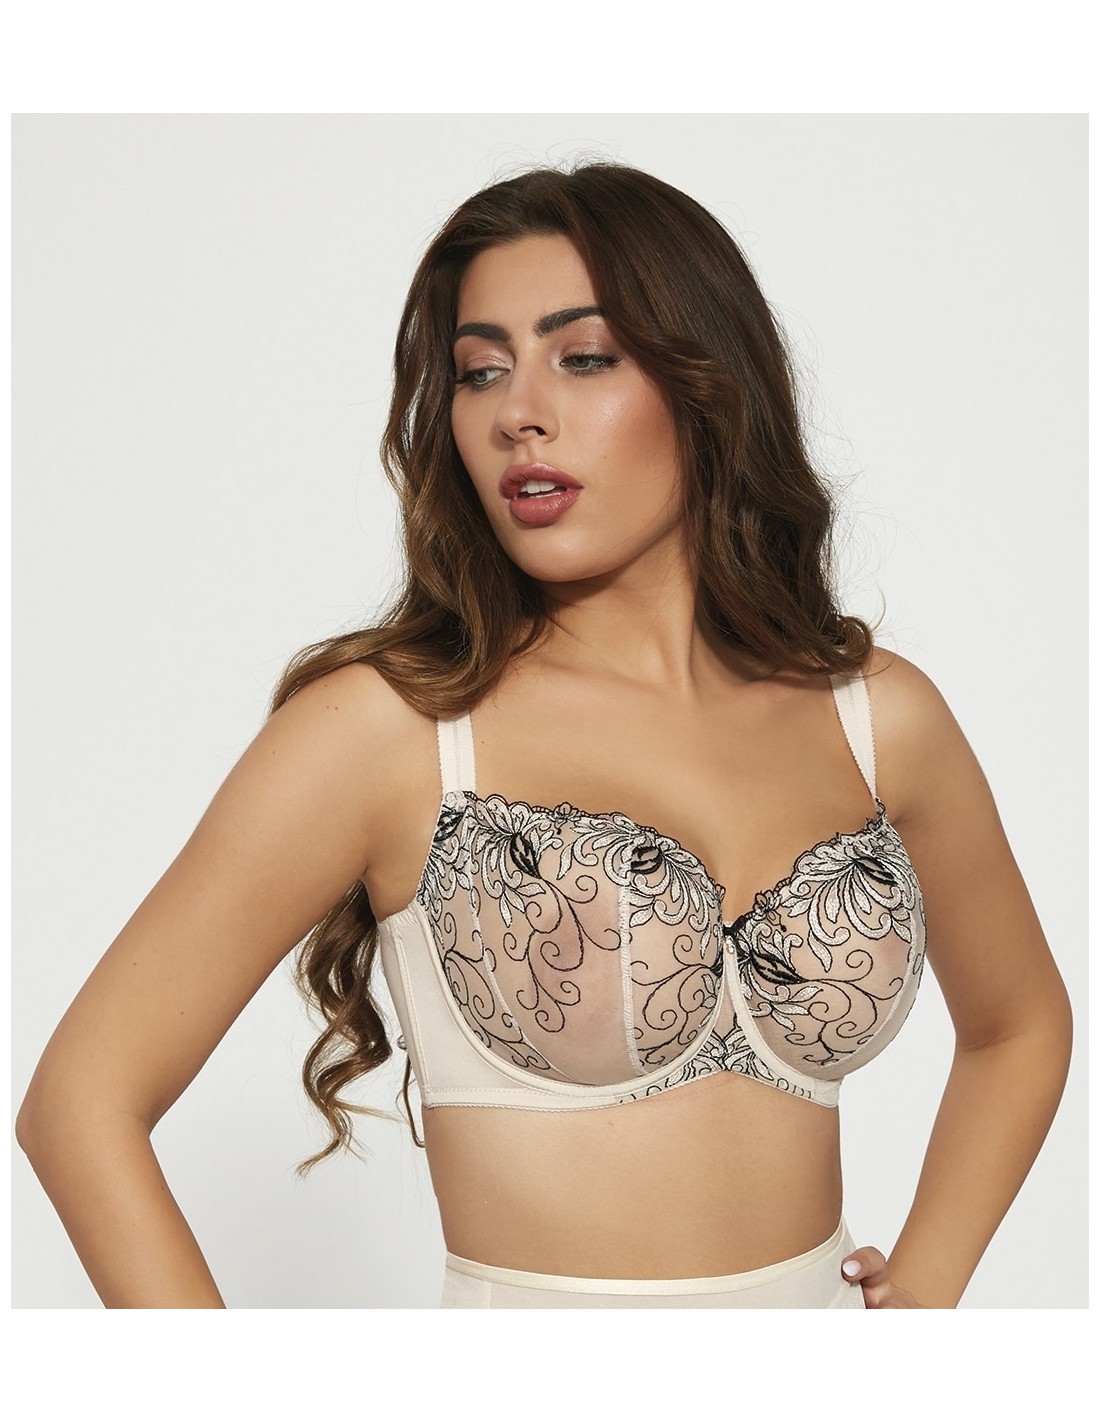 https://curvyvanitose.it/25109-thickbox_default/plus-size-bra-with-krisline-claire-soft-tulle-cups.jpg